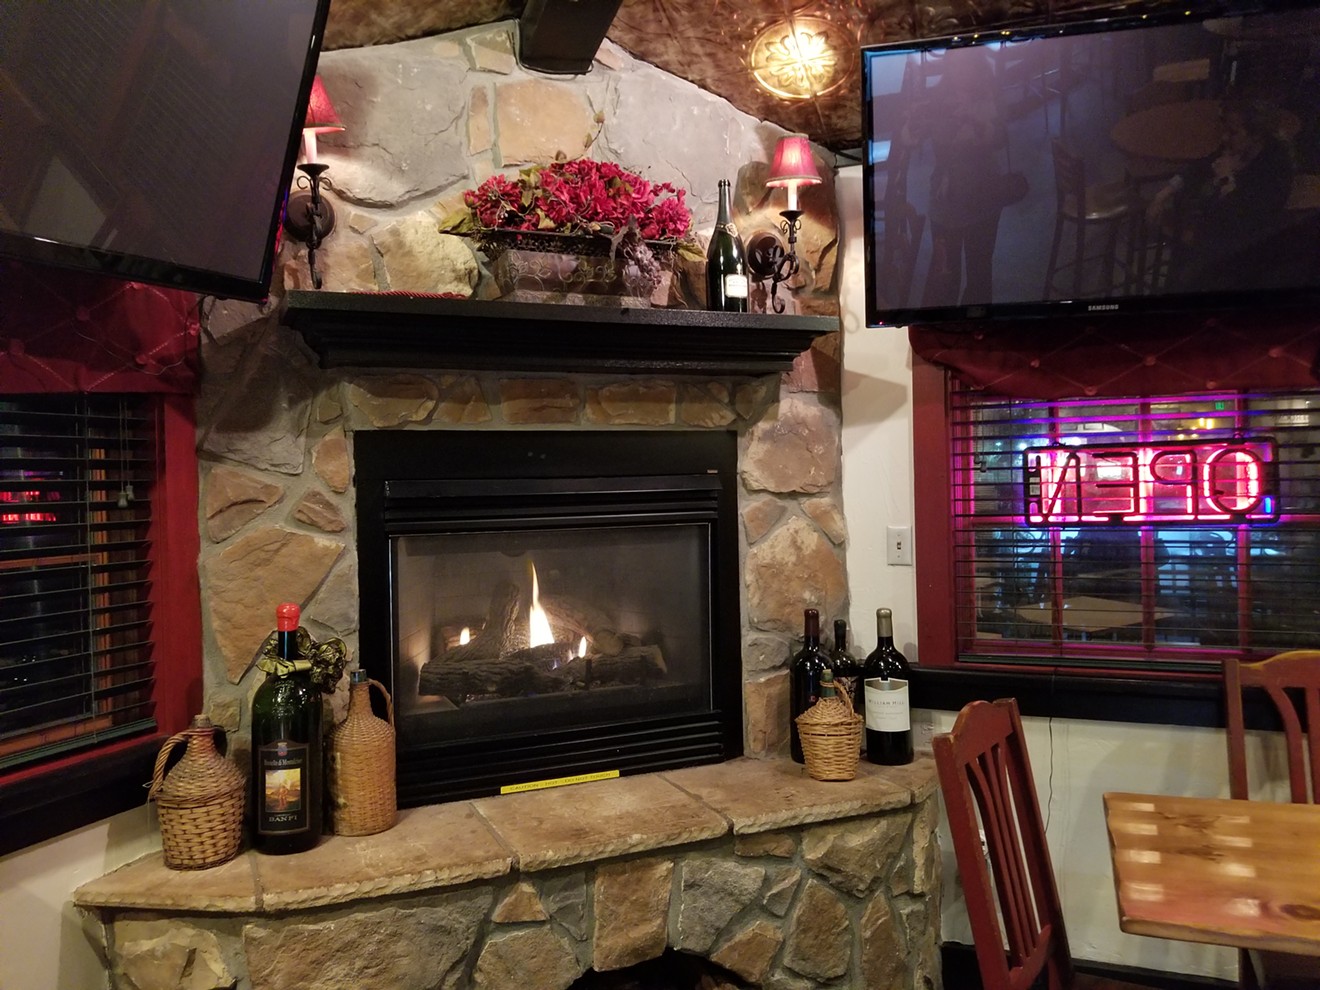 Wine and a fireplace at Virgilio's — the perfect winter retreat.